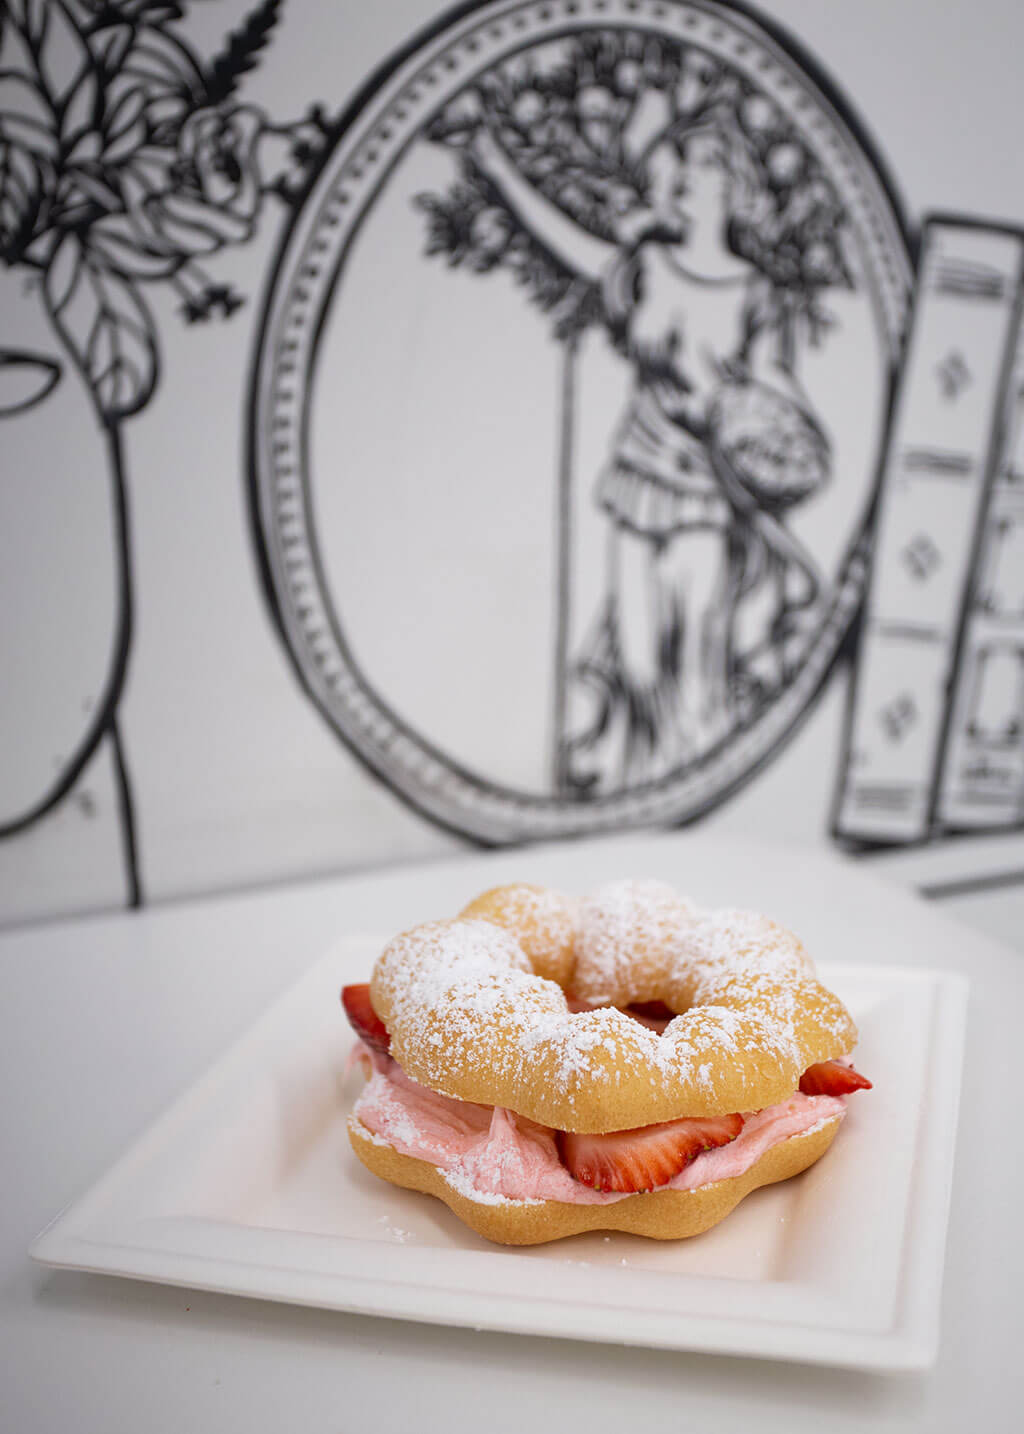 drive-swim-fly-chicago-illinois-2d-restaurant-cartoon-black-and-white-cafe-mochi-donut-strawberry-frosting